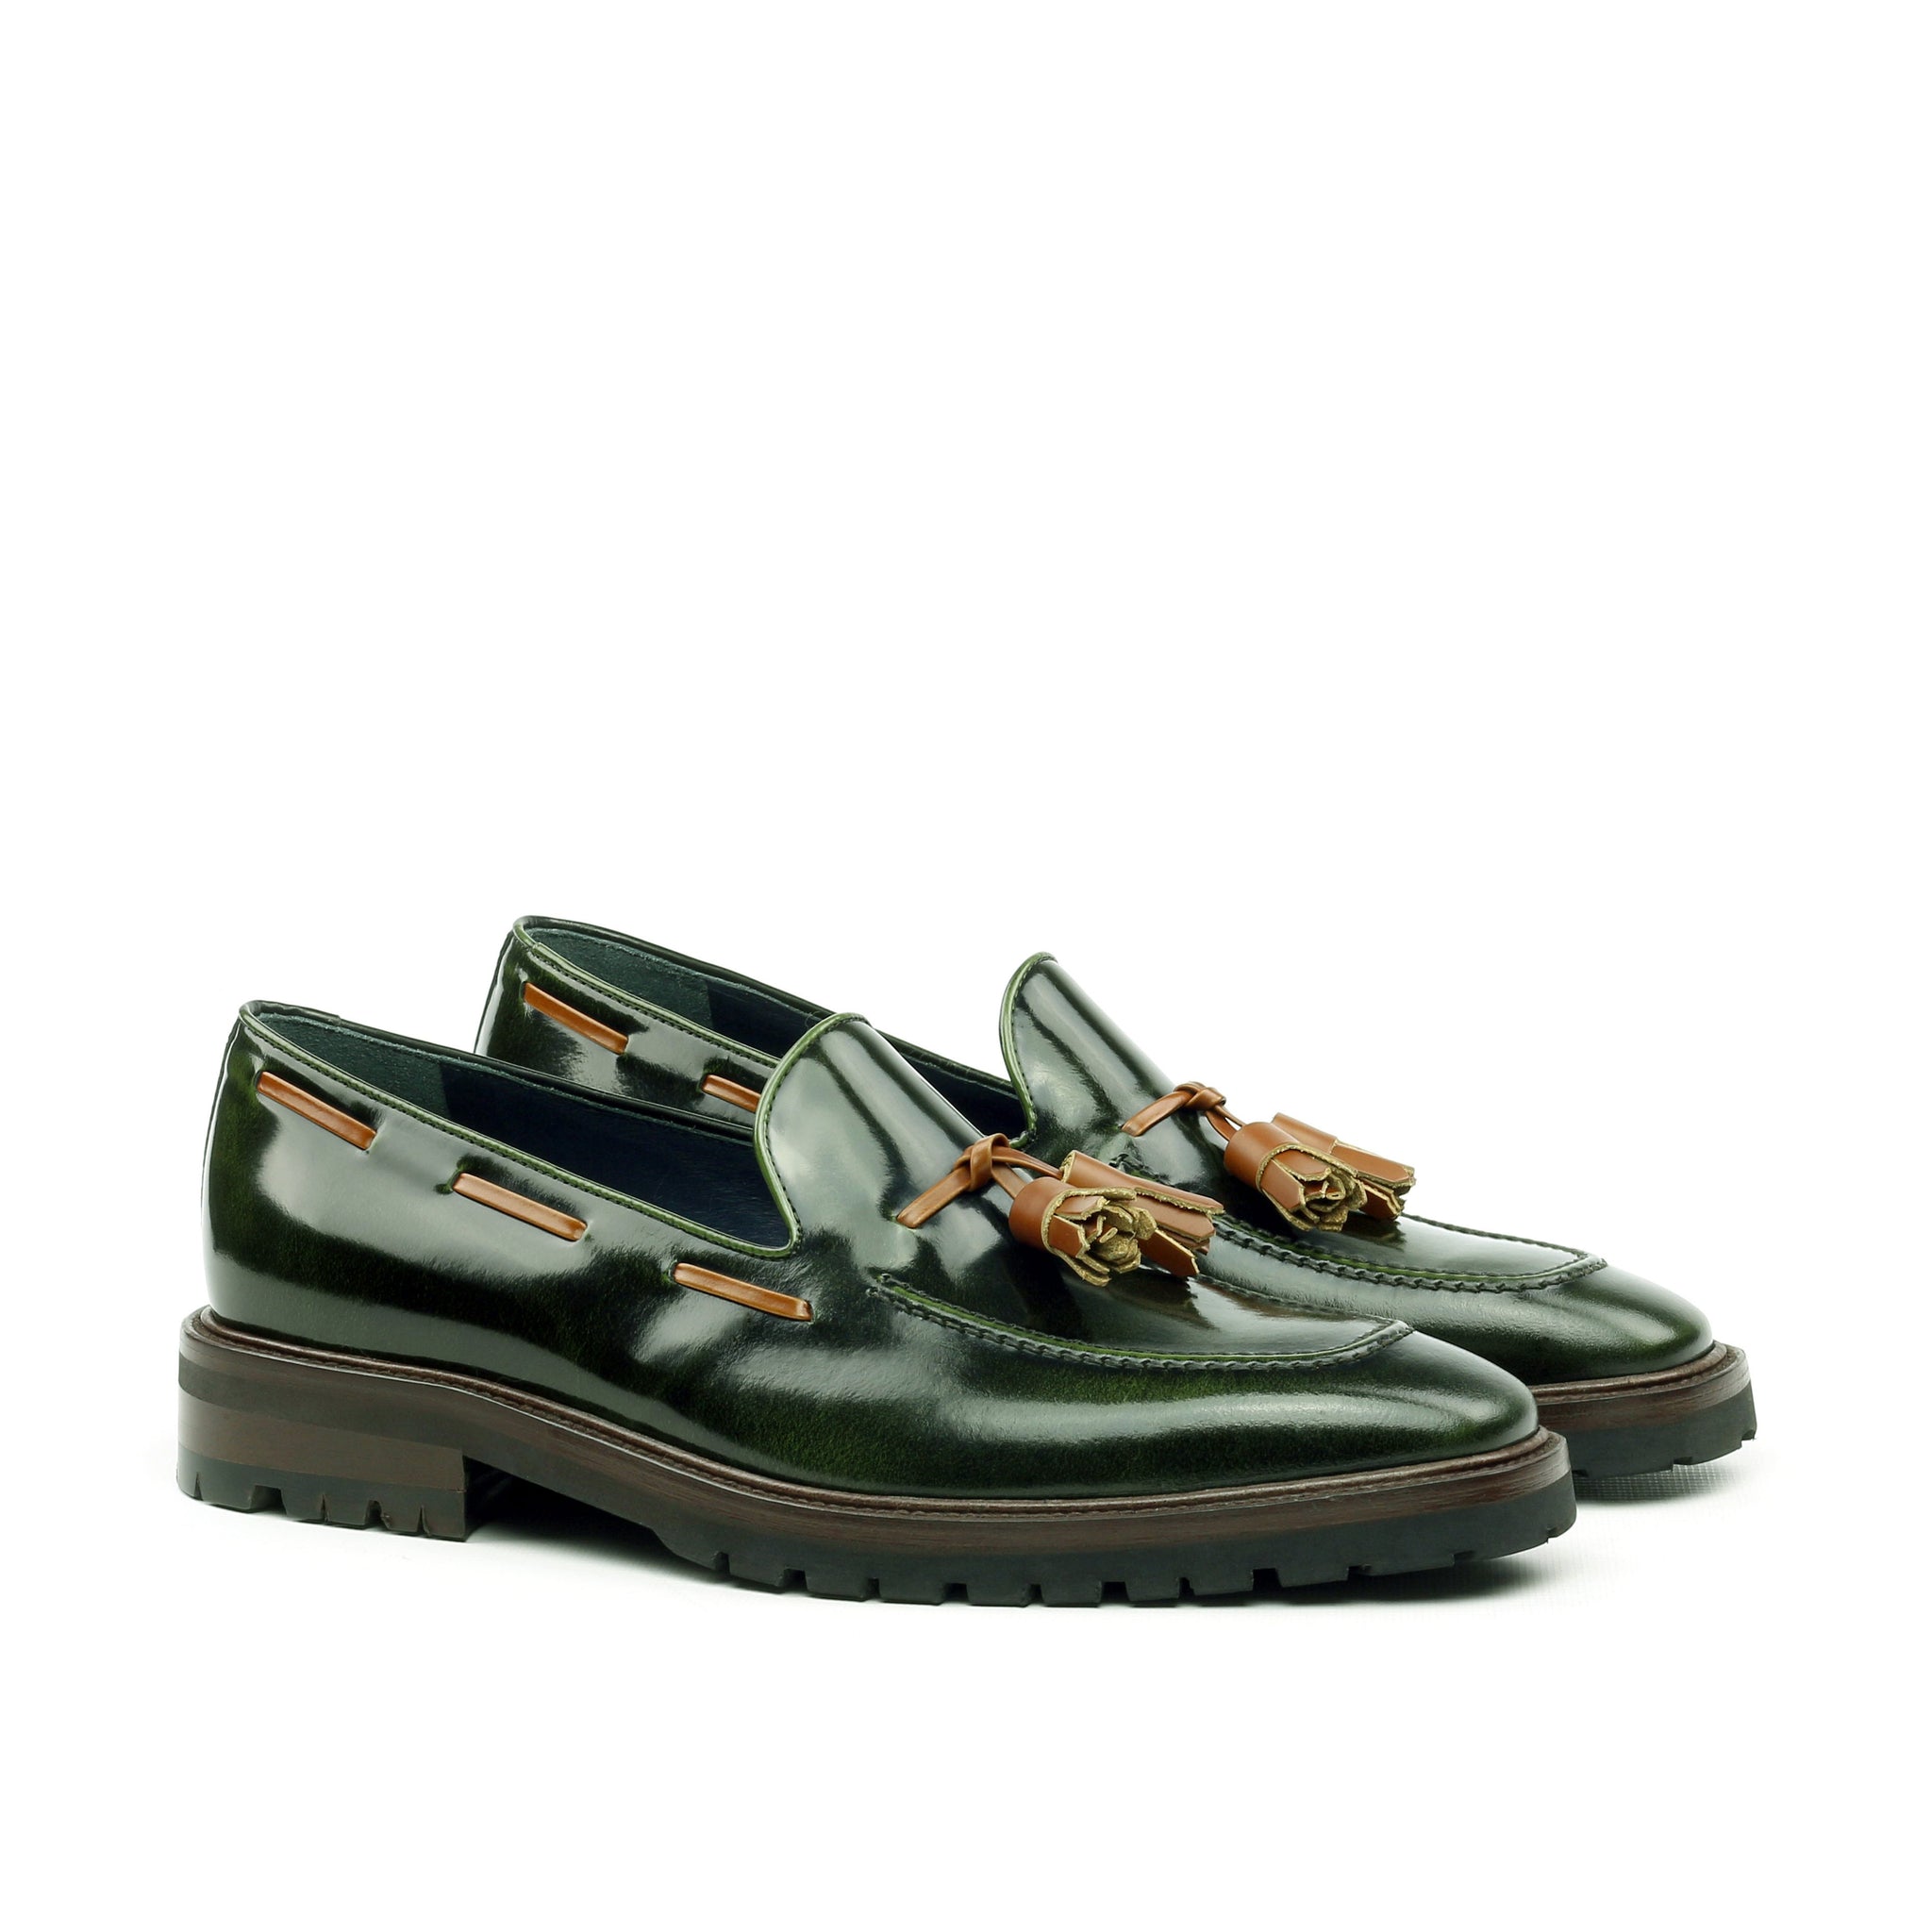 Unique Handcrafted Green Polish Calf Laceless Loafer w/ Tassles